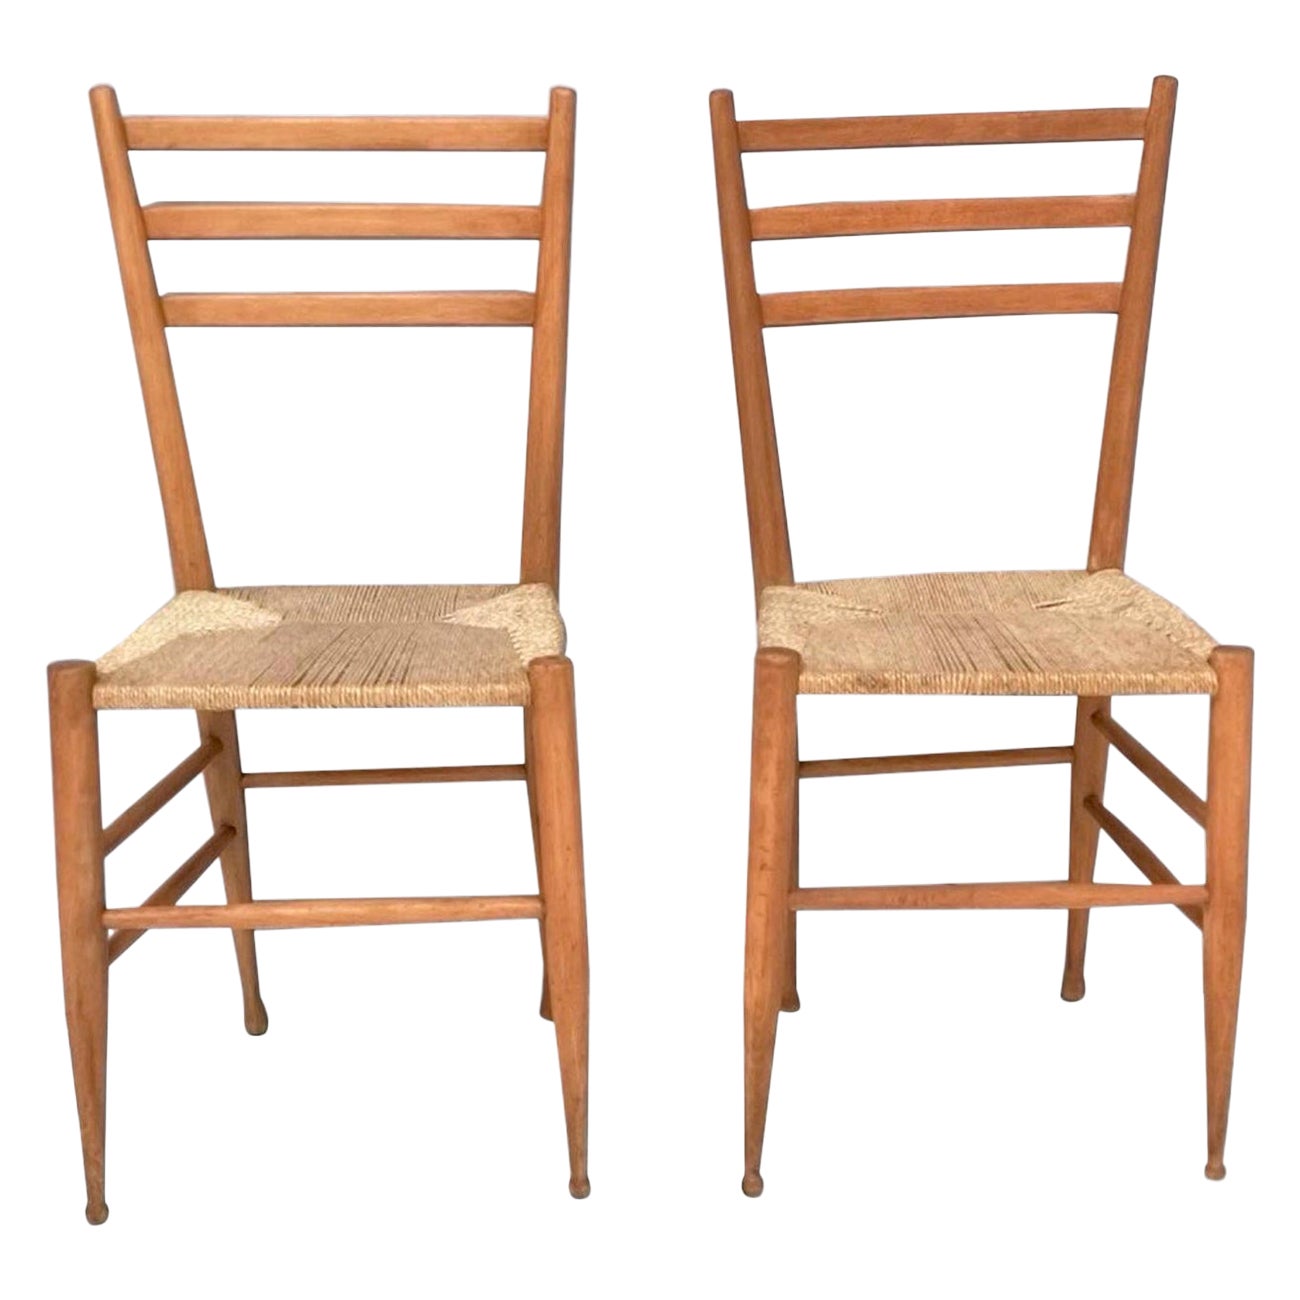 Pair of Vintage Beech and Wicker Chiavarine Chairs with Slatted Backrest, Italy For Sale